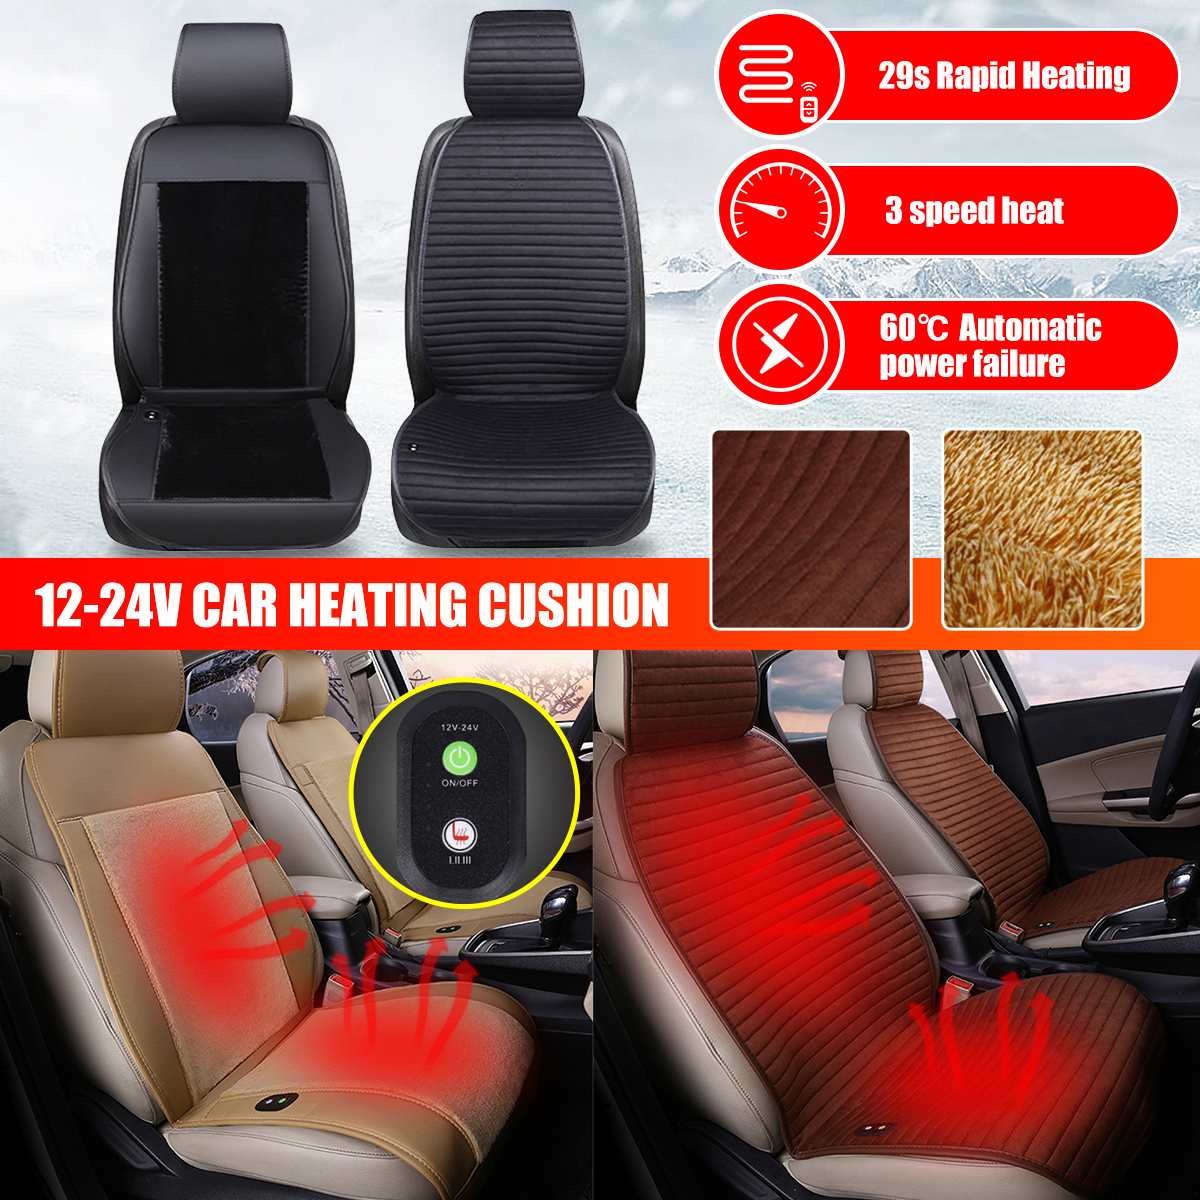 12/24V Universal Auto Car Seat Heated Cover Cushion Pad Mat Front Protector Fast Electric Heated Adjustable Warm Winter 3 Mode